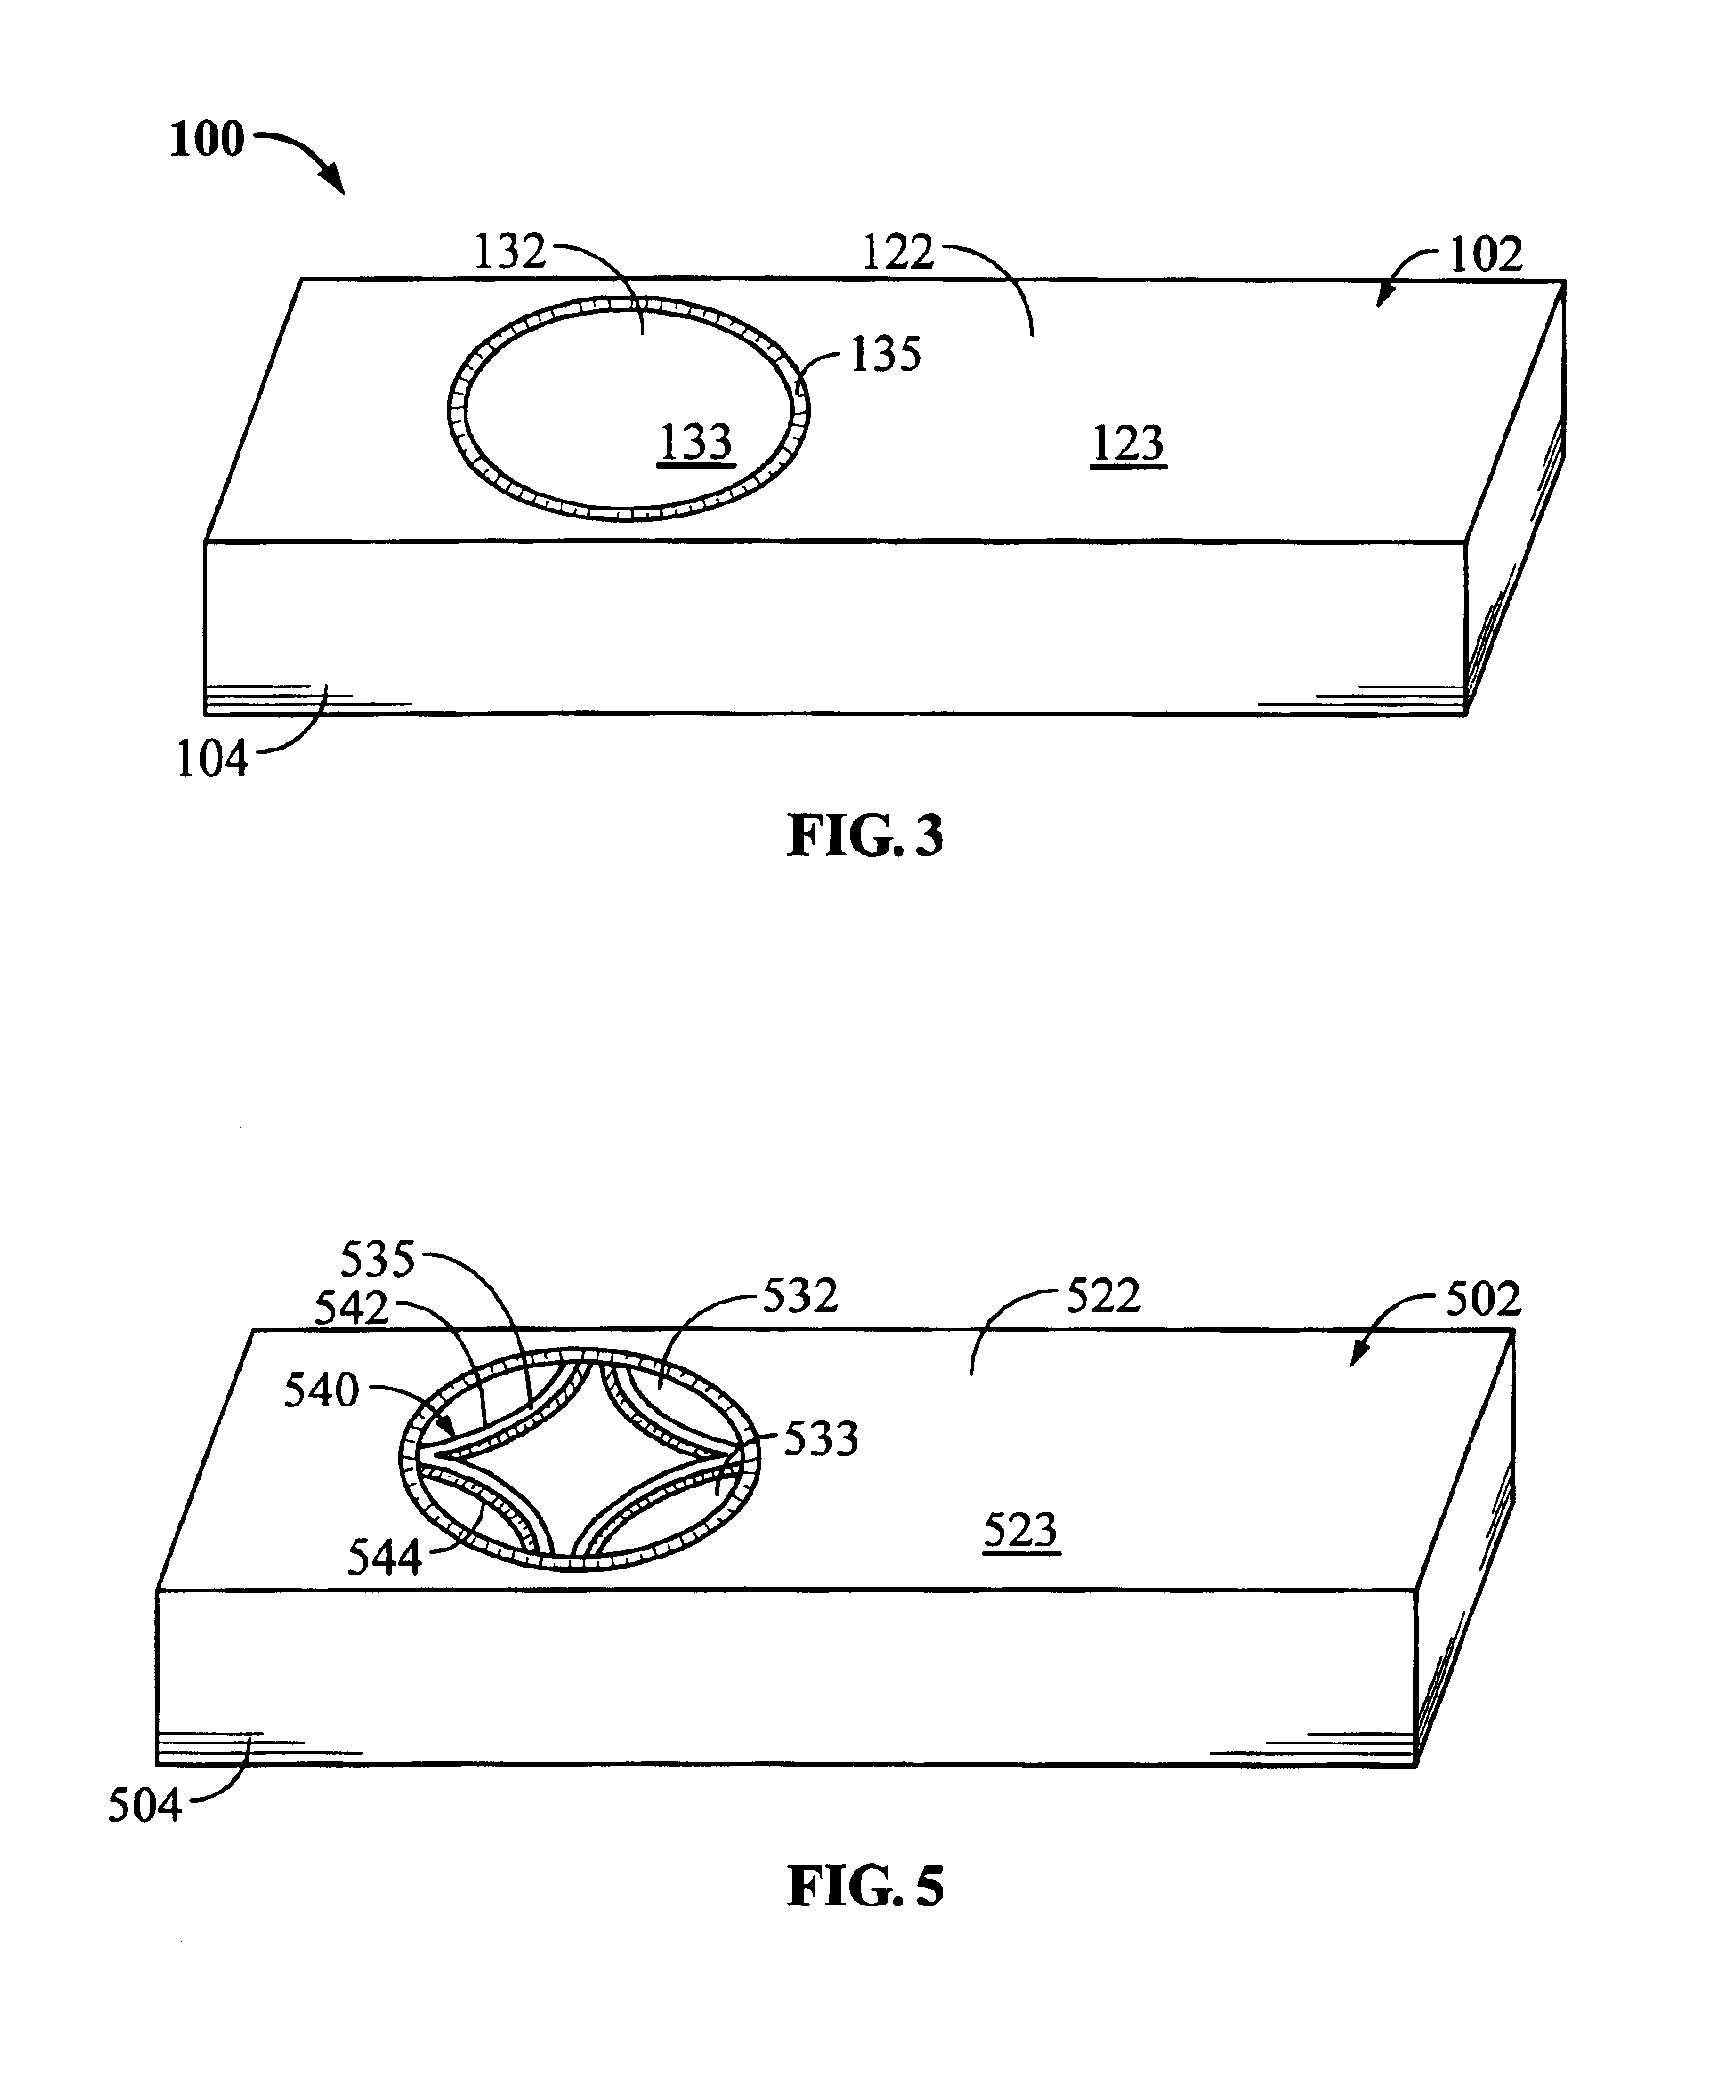 Disk drive cover for use with a disk drive to provide for disk shrouding and heat dissipation